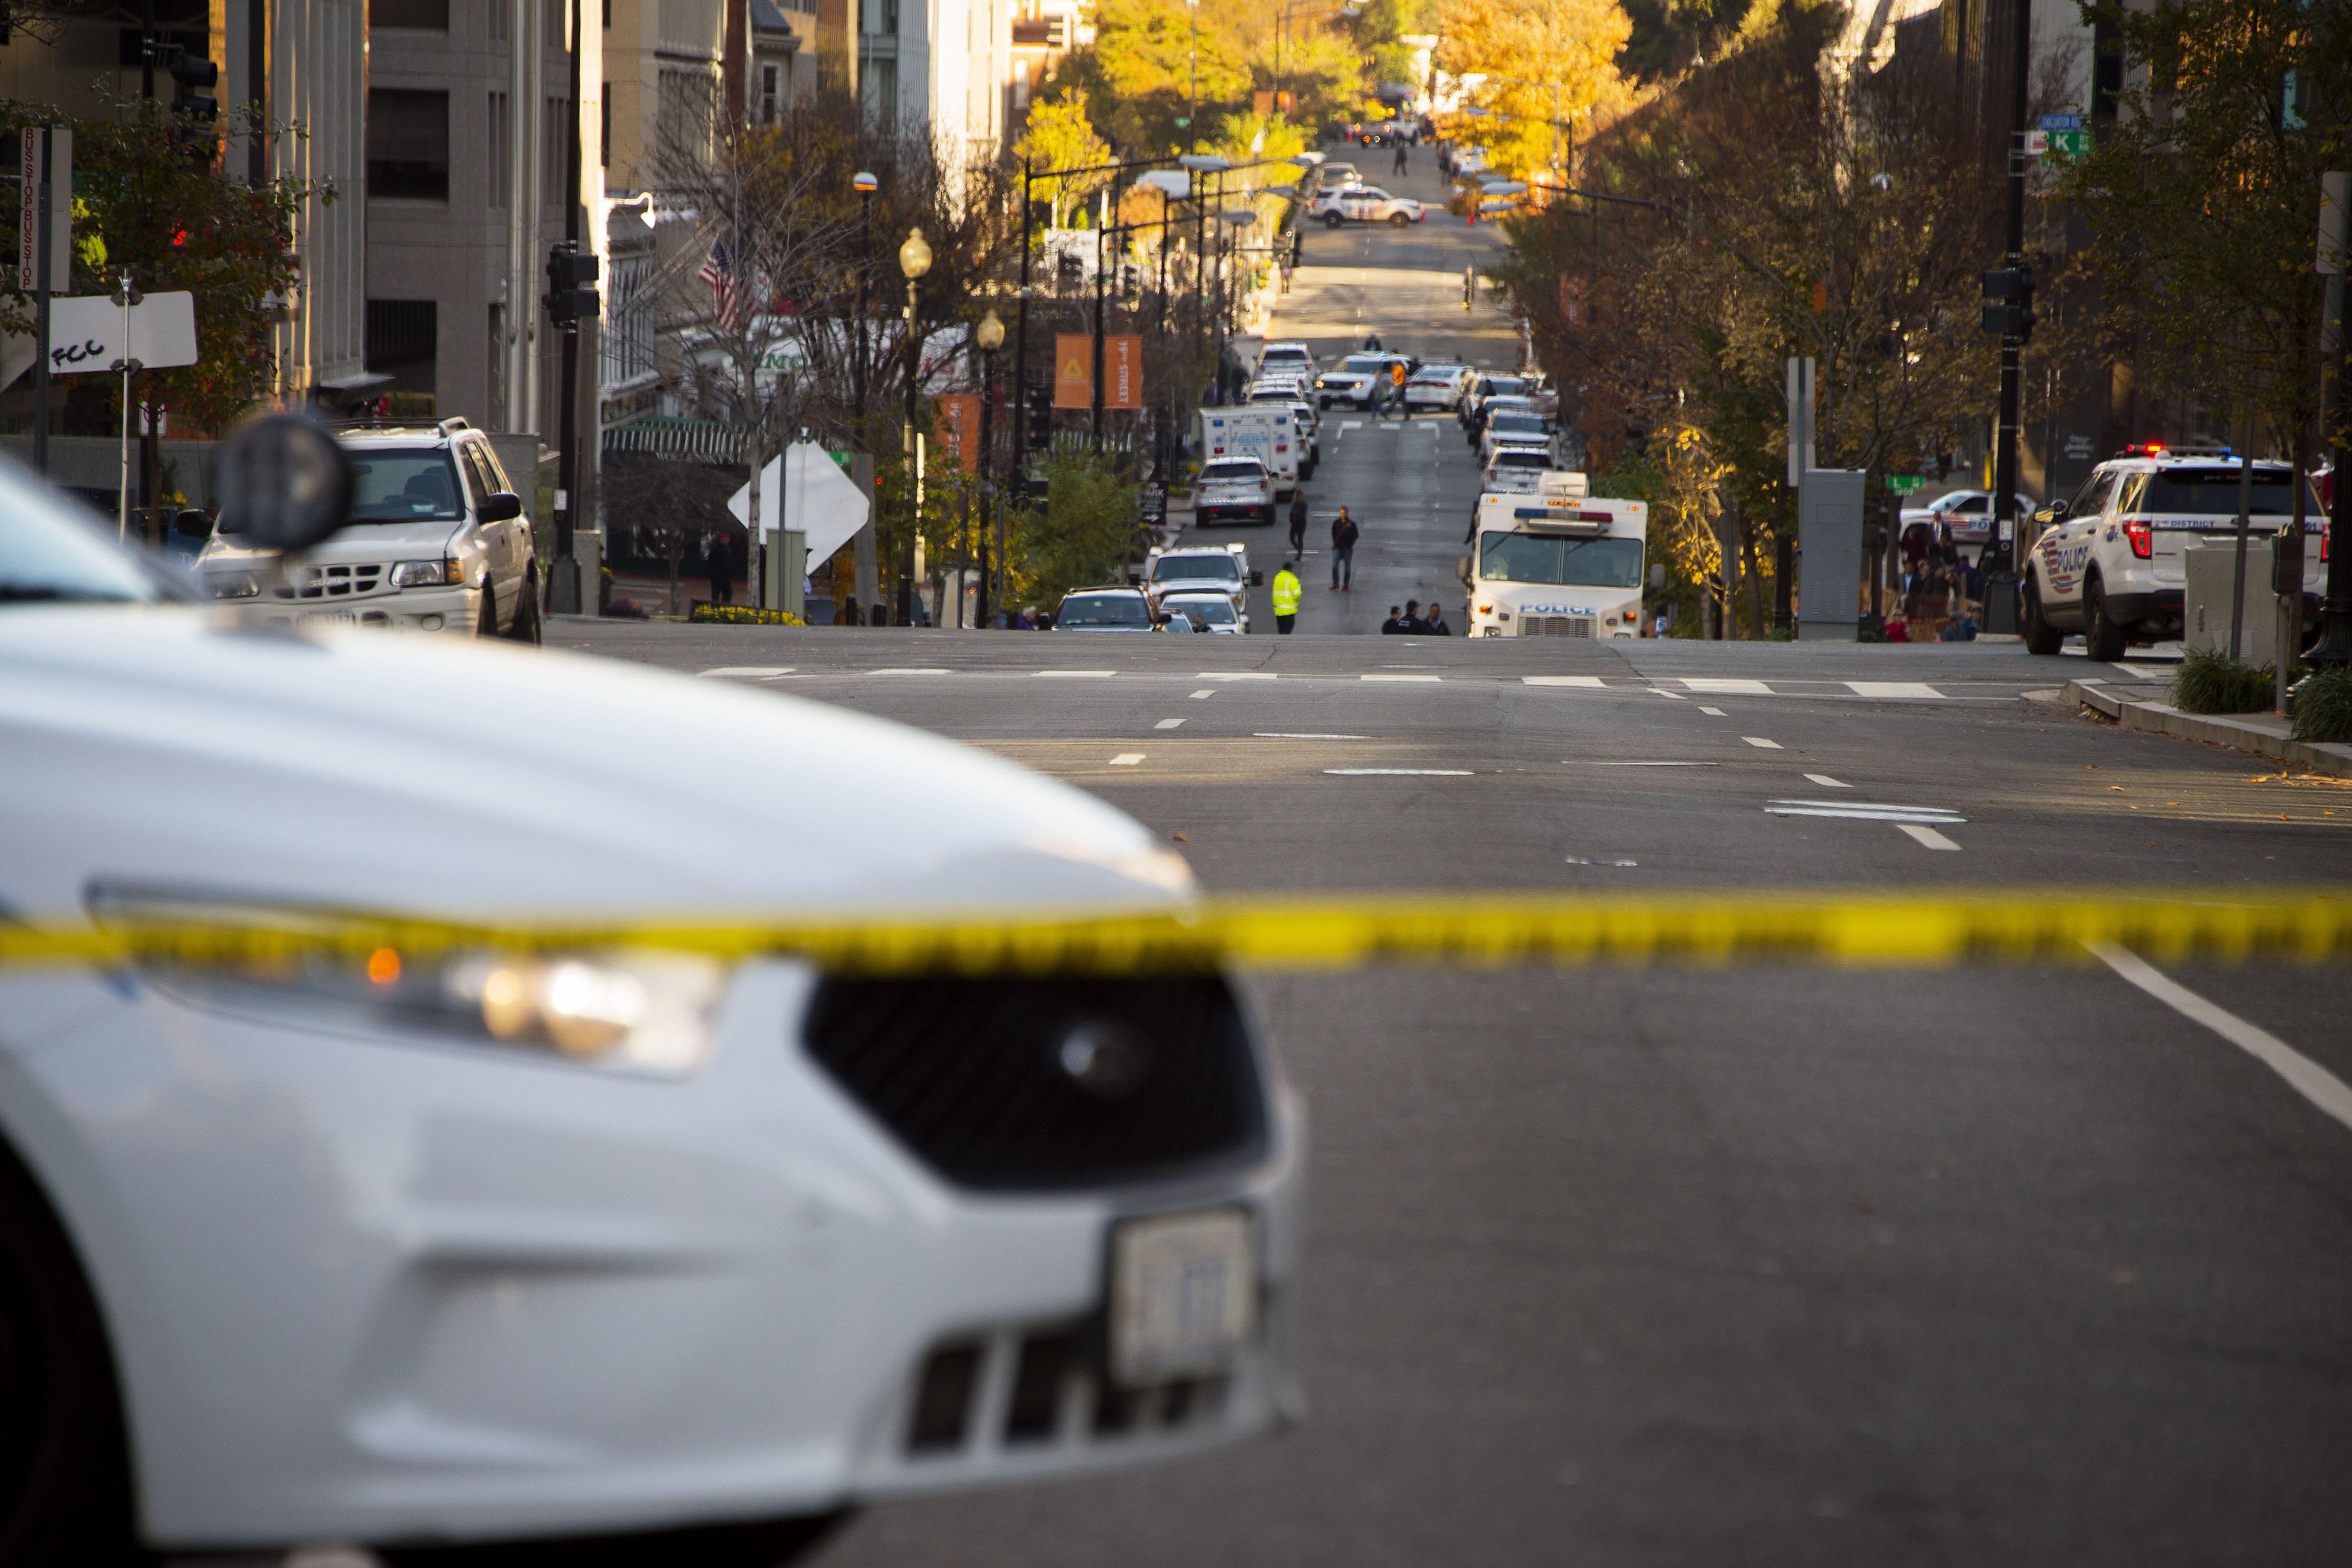 Police cars line 19th Street NW in Washington, DC, November 16, 2015, during a barricade situation. The Washington post reported that police said a woman fired a shot in the area around midnight and it turned into a barricade situation inside an office building. No one was injured but situation caused a major traffic snarl during the morning rush hour in downtown DC.  AFP PHOTO / JIM WATSON        (Photo credit should read JIM WATSON/AFP/Getty Images)